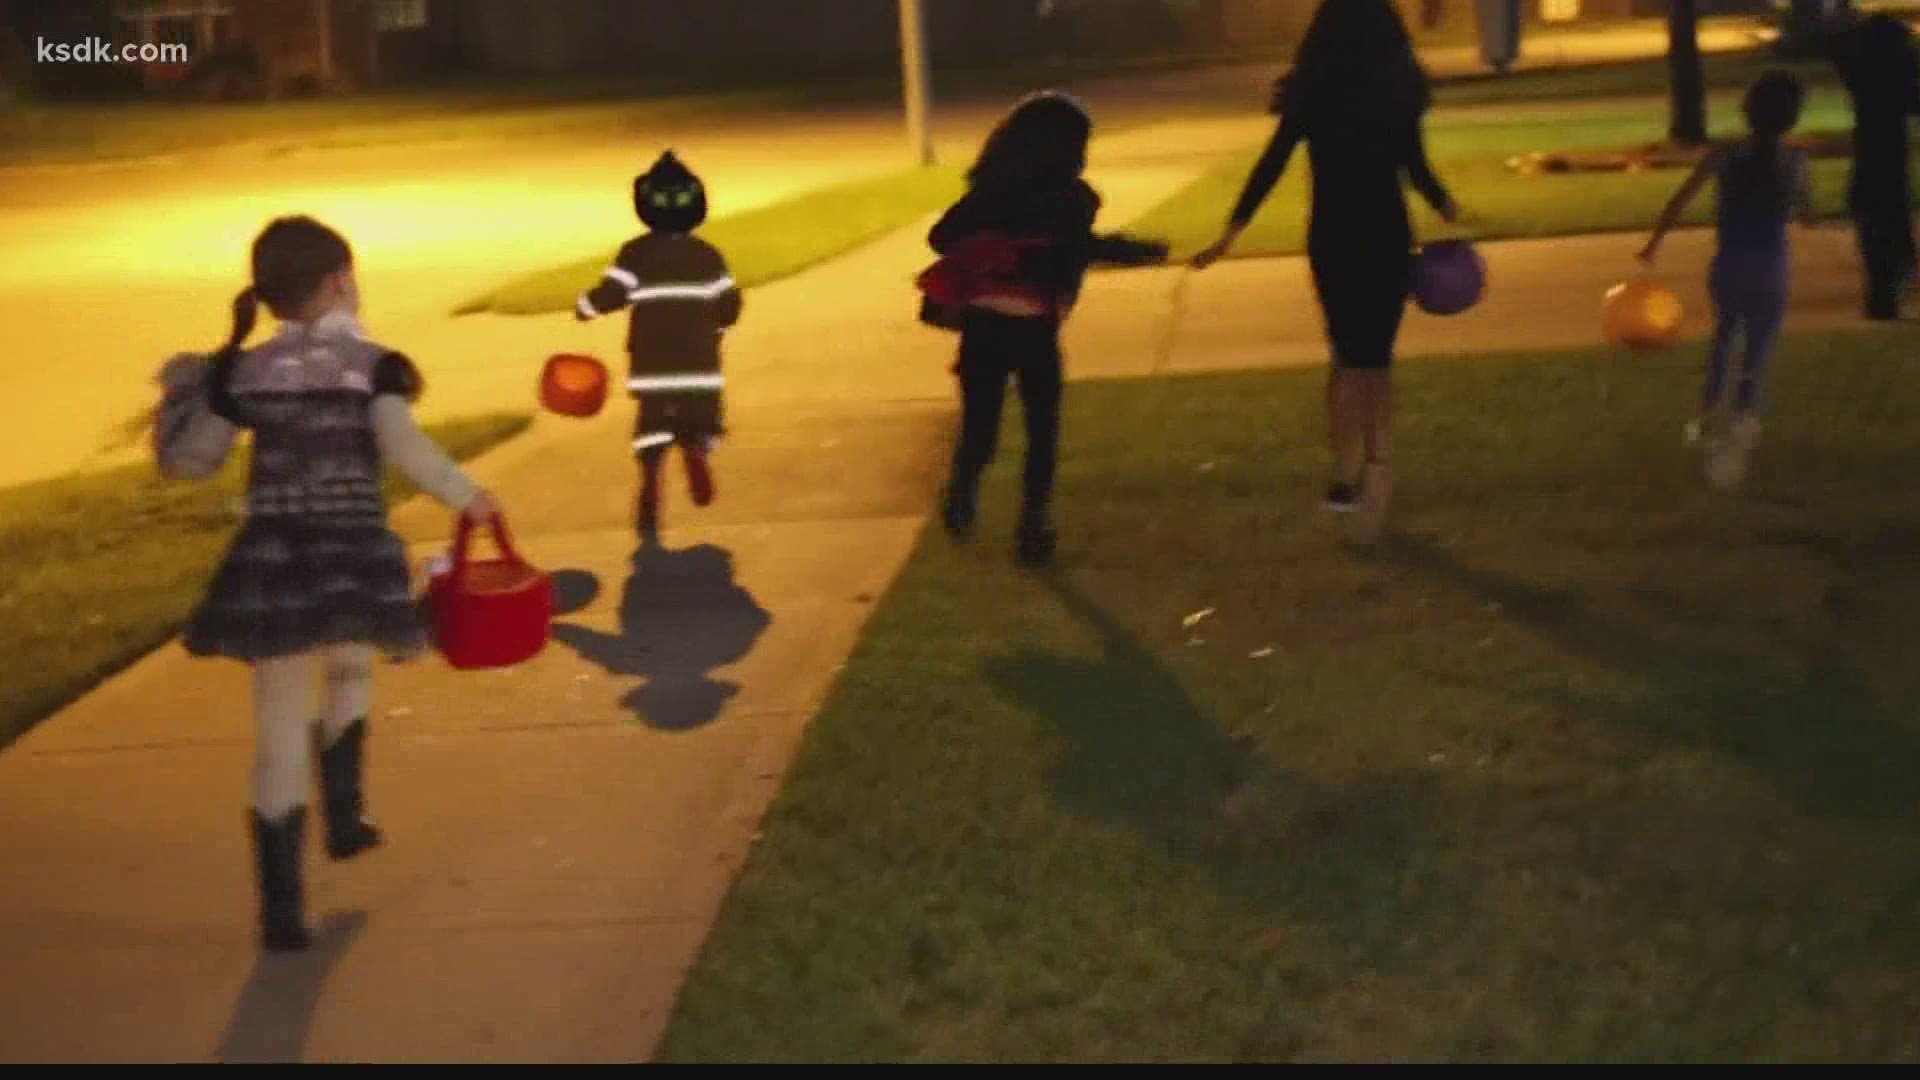 Health officials say Halloween isn't canceled, but urge people to celebrate safely